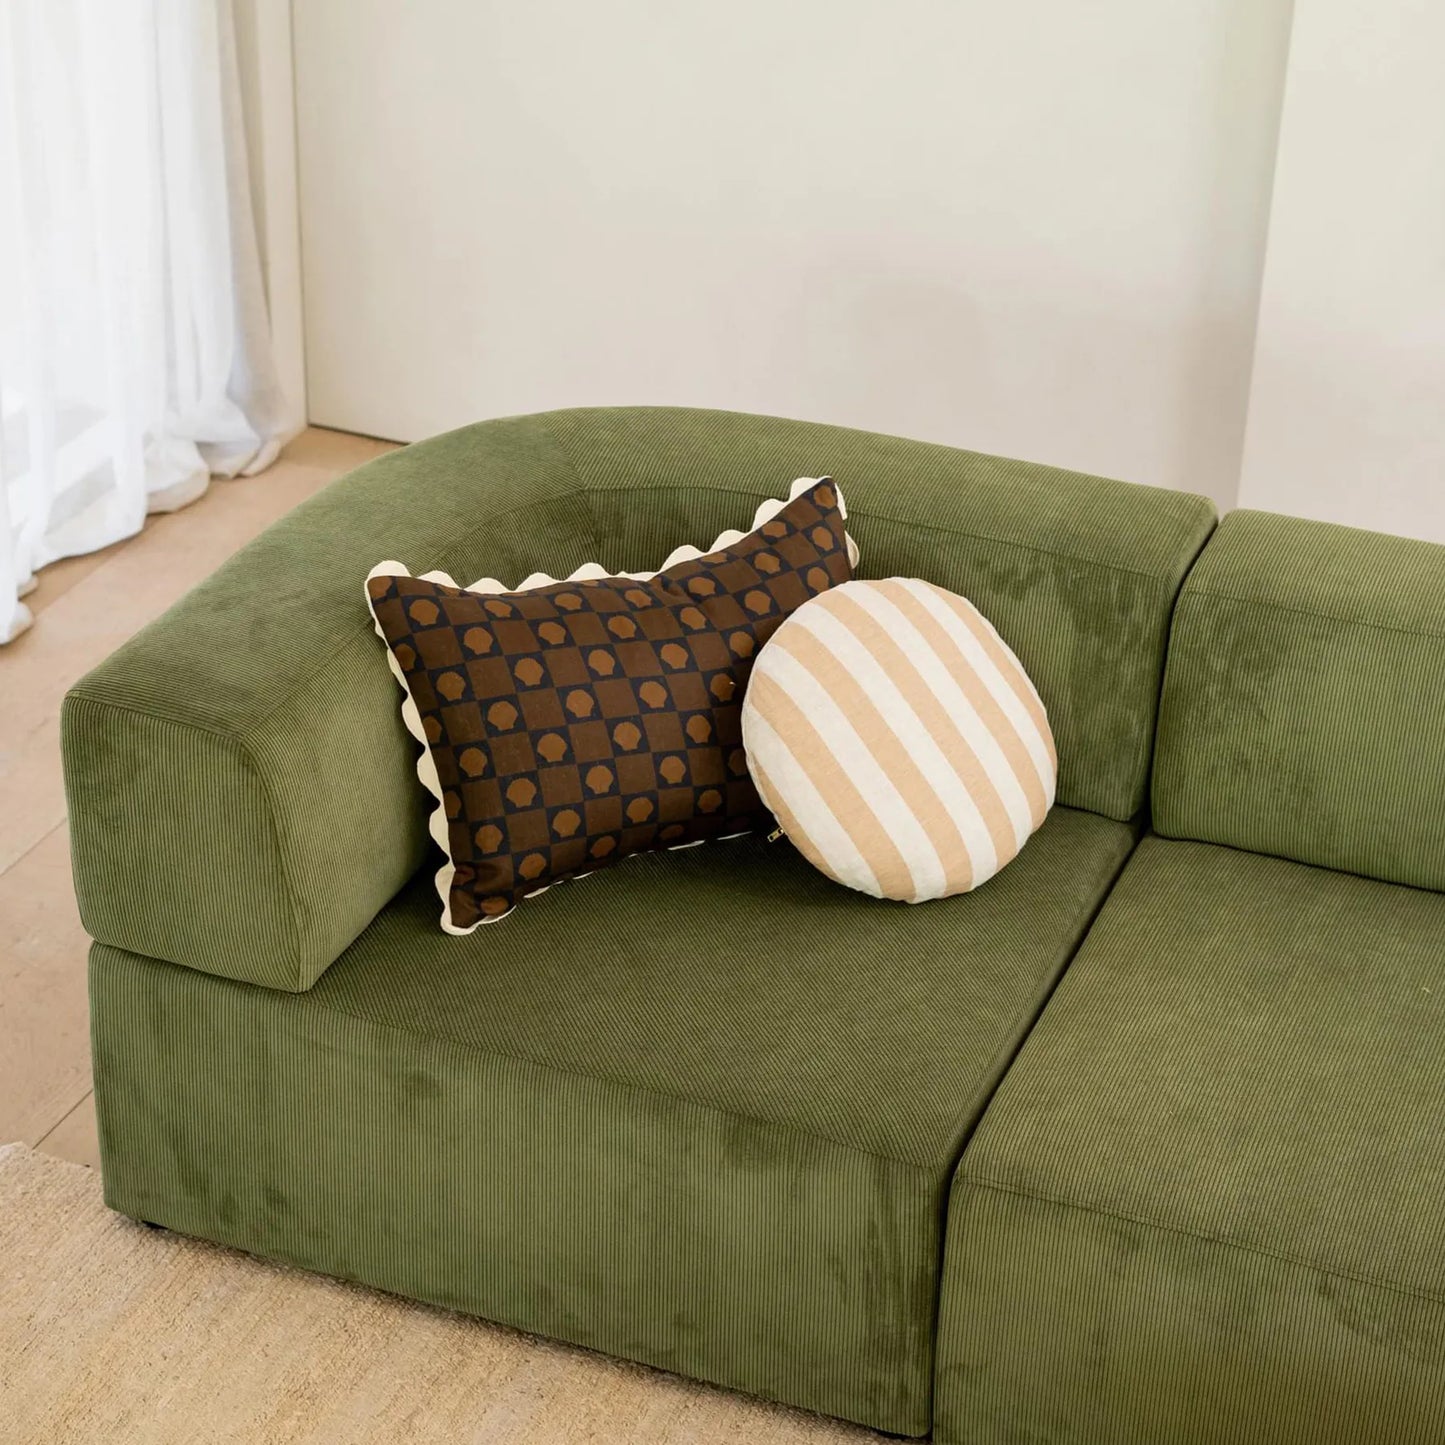 Stretch 4 Seater Sofa - Corduroy Forest